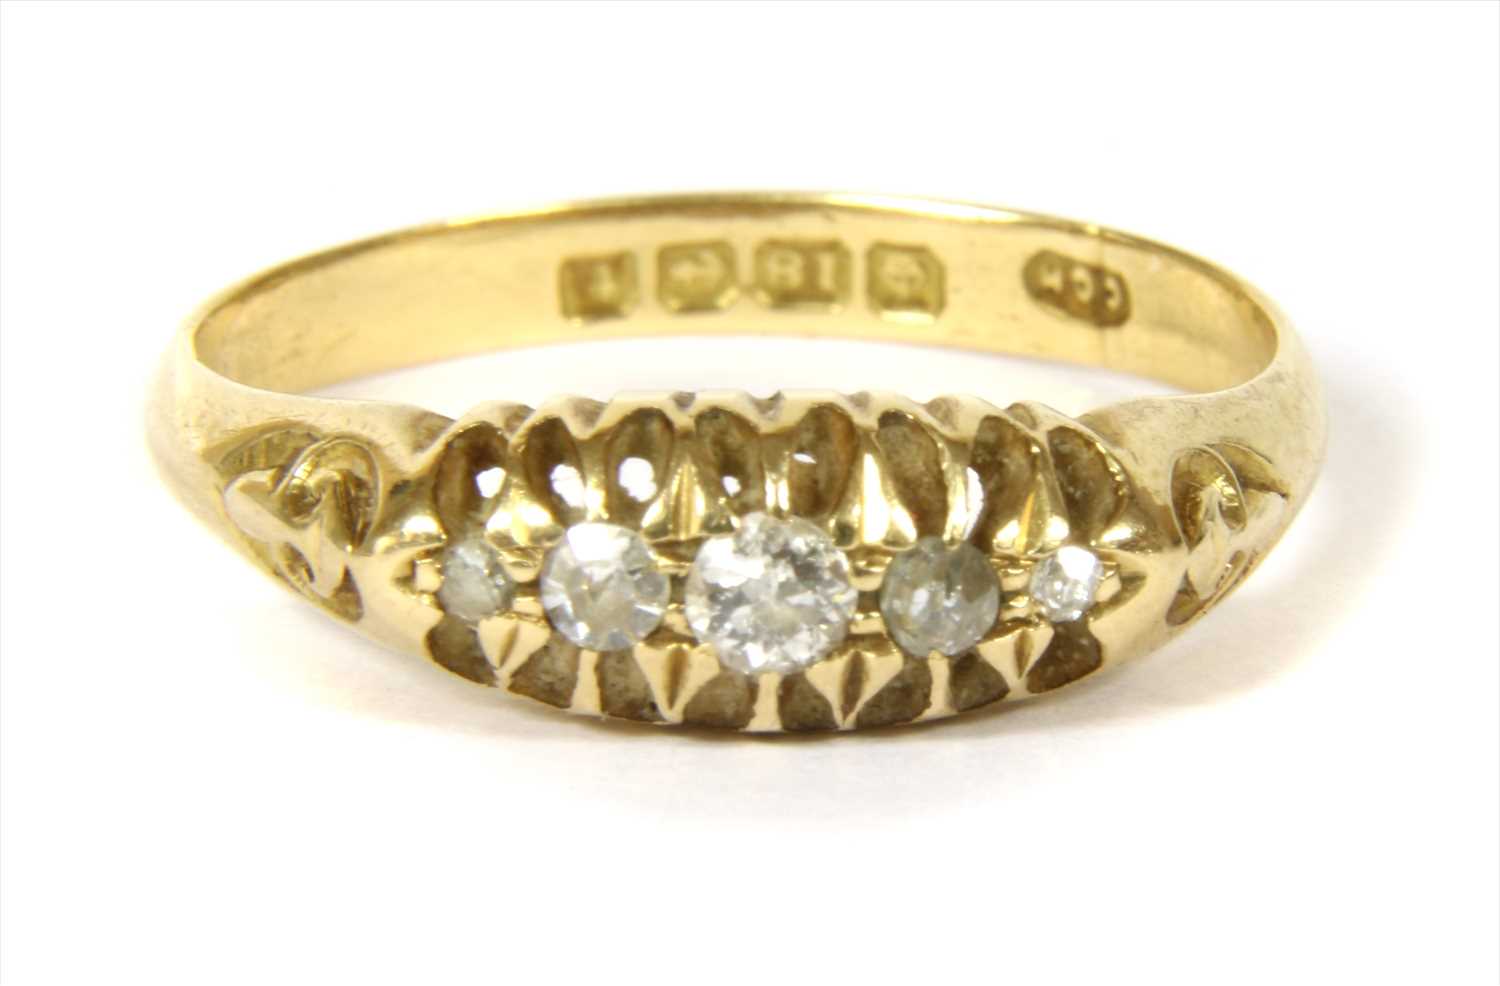 Lot 4 - An 18ct gold diamond boat shaped ring